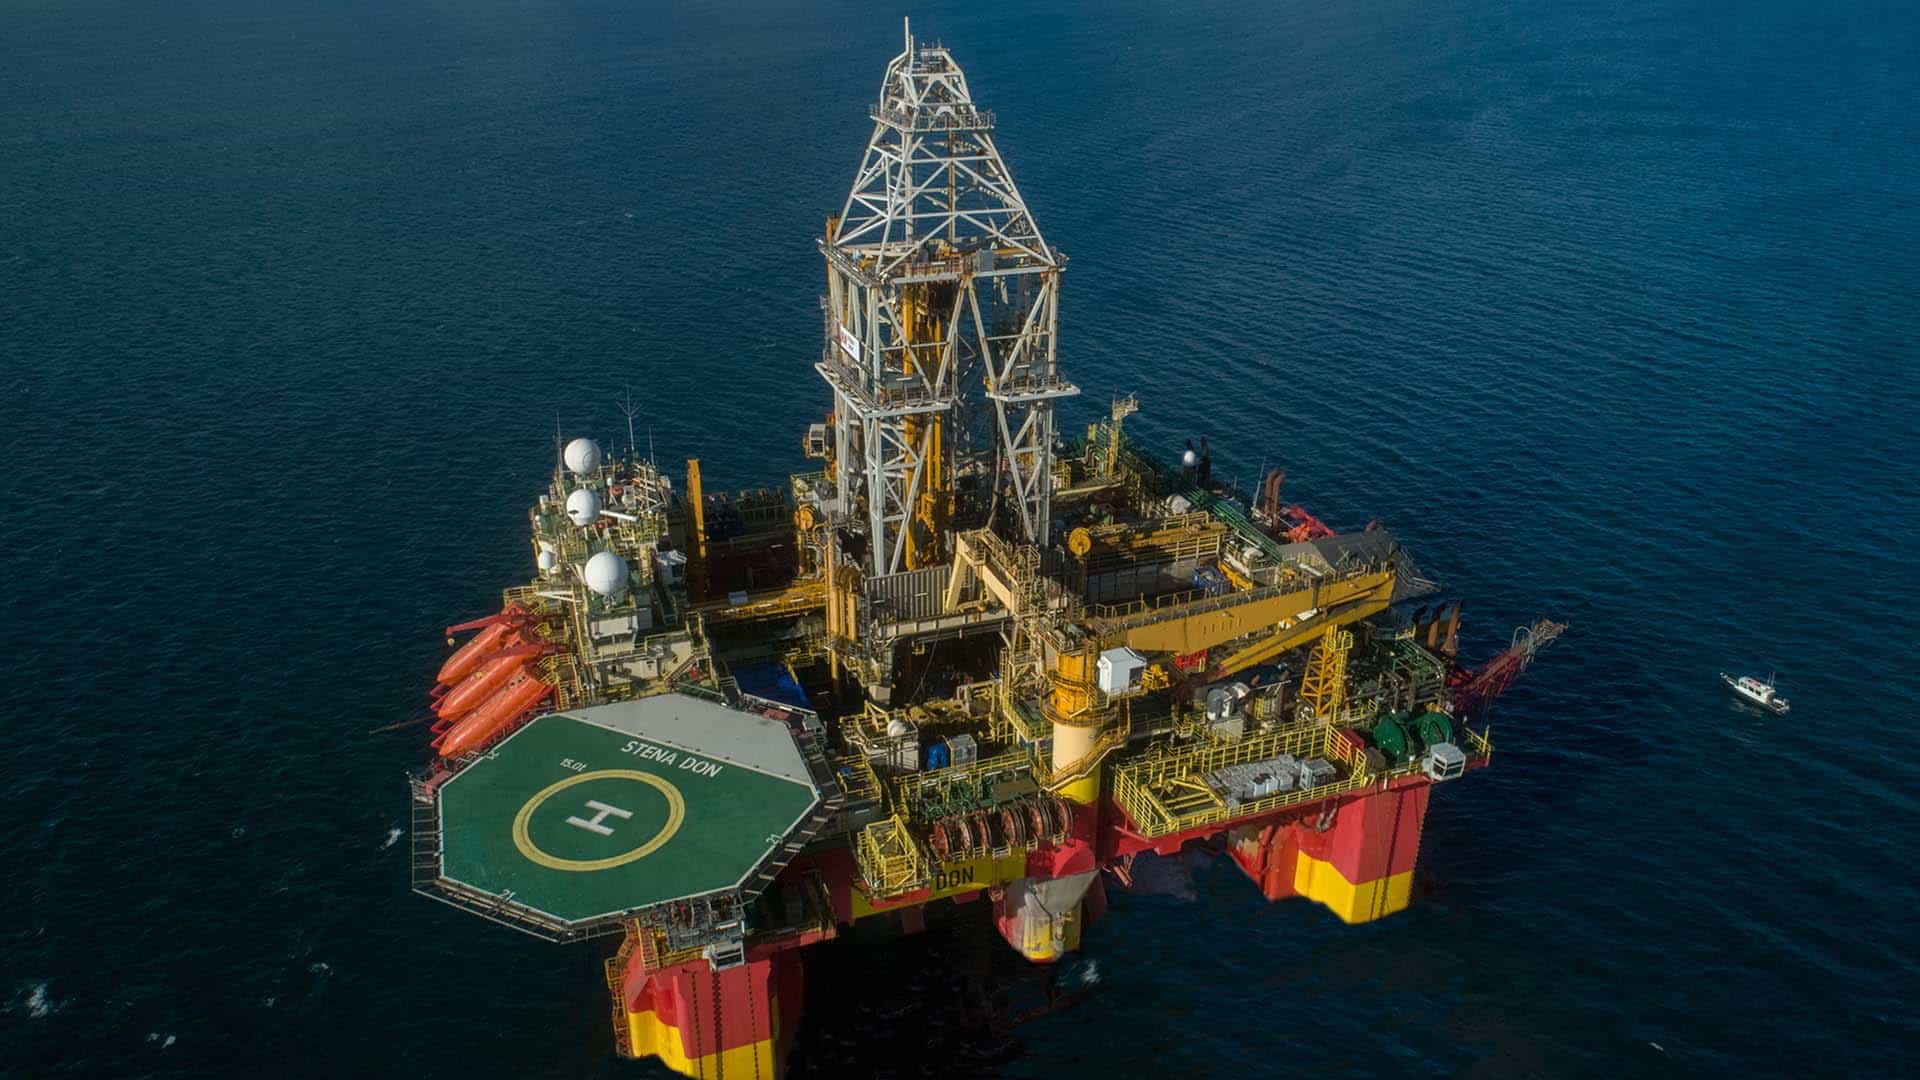 UK player awards North Sea gig to Petrofac and secures rig slot to spud well in two months